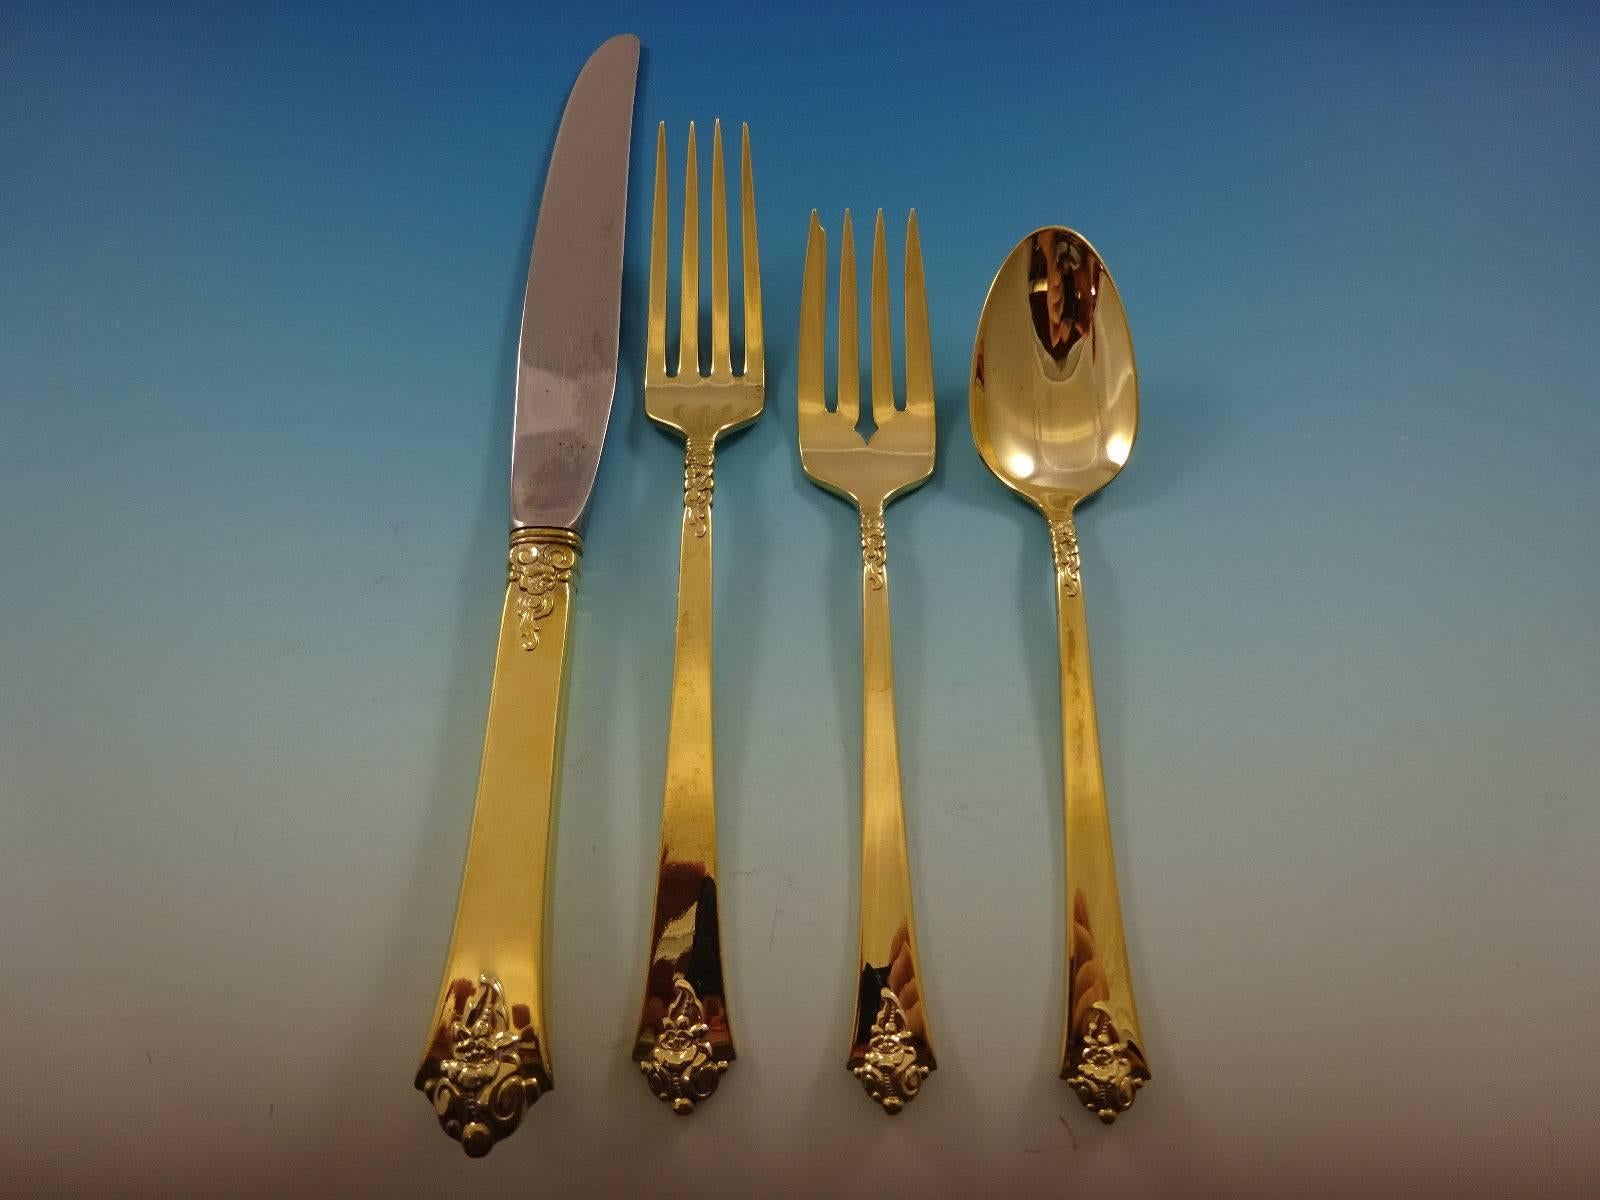 Stunning castle rose gold by Royal Crest sterling silver flatware set of 48 pieces. Gold flatware is on trend and makes a bold statement on your table. This set is vermeil (completely gold-washed) and includes:

12 Knives, 9 1/8